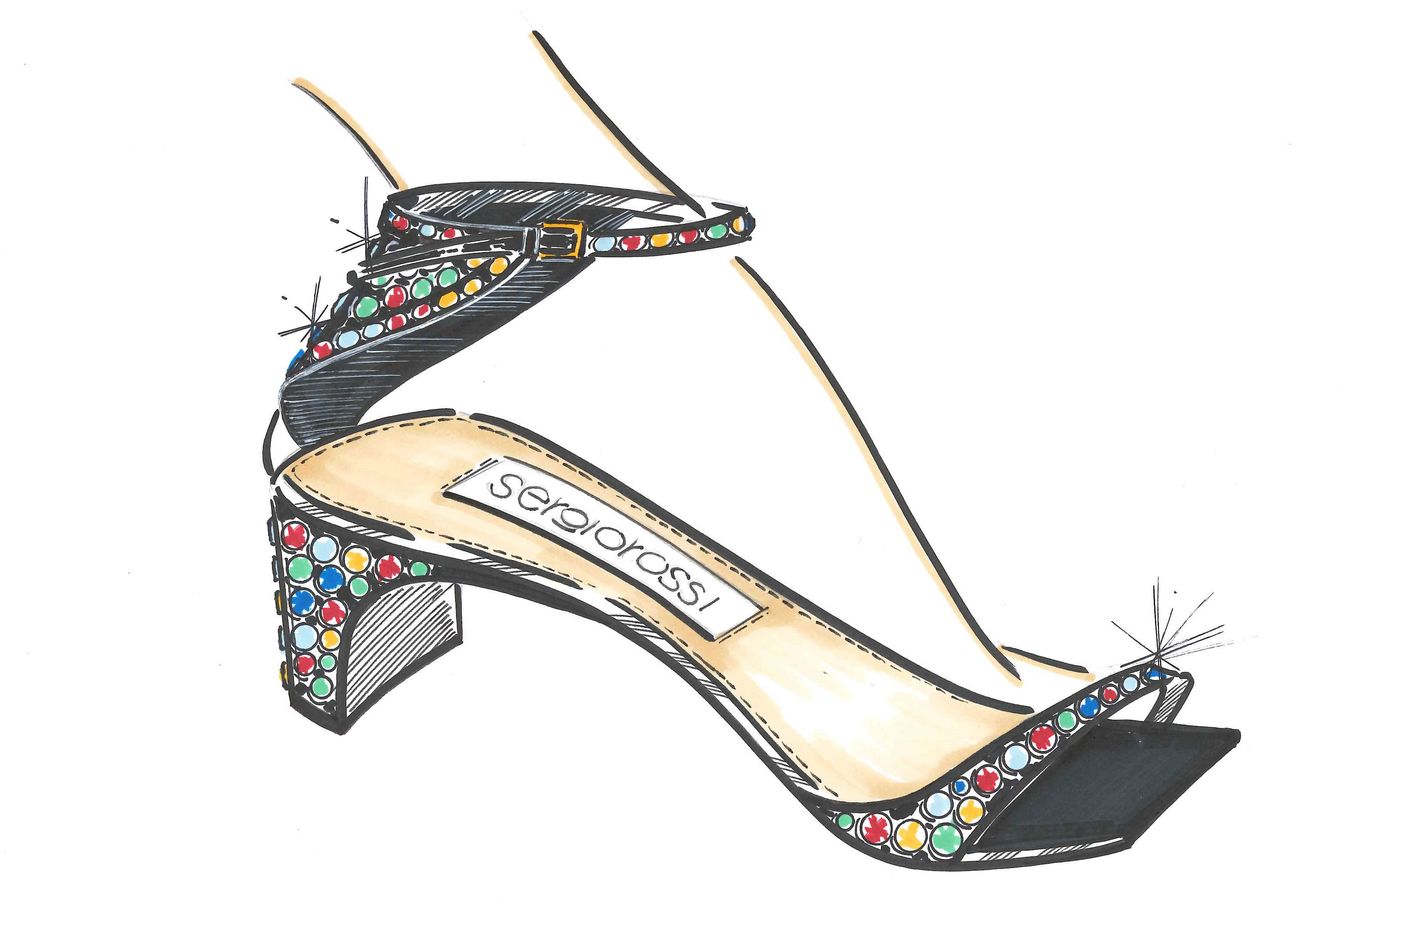 Shoe sketches on Behance